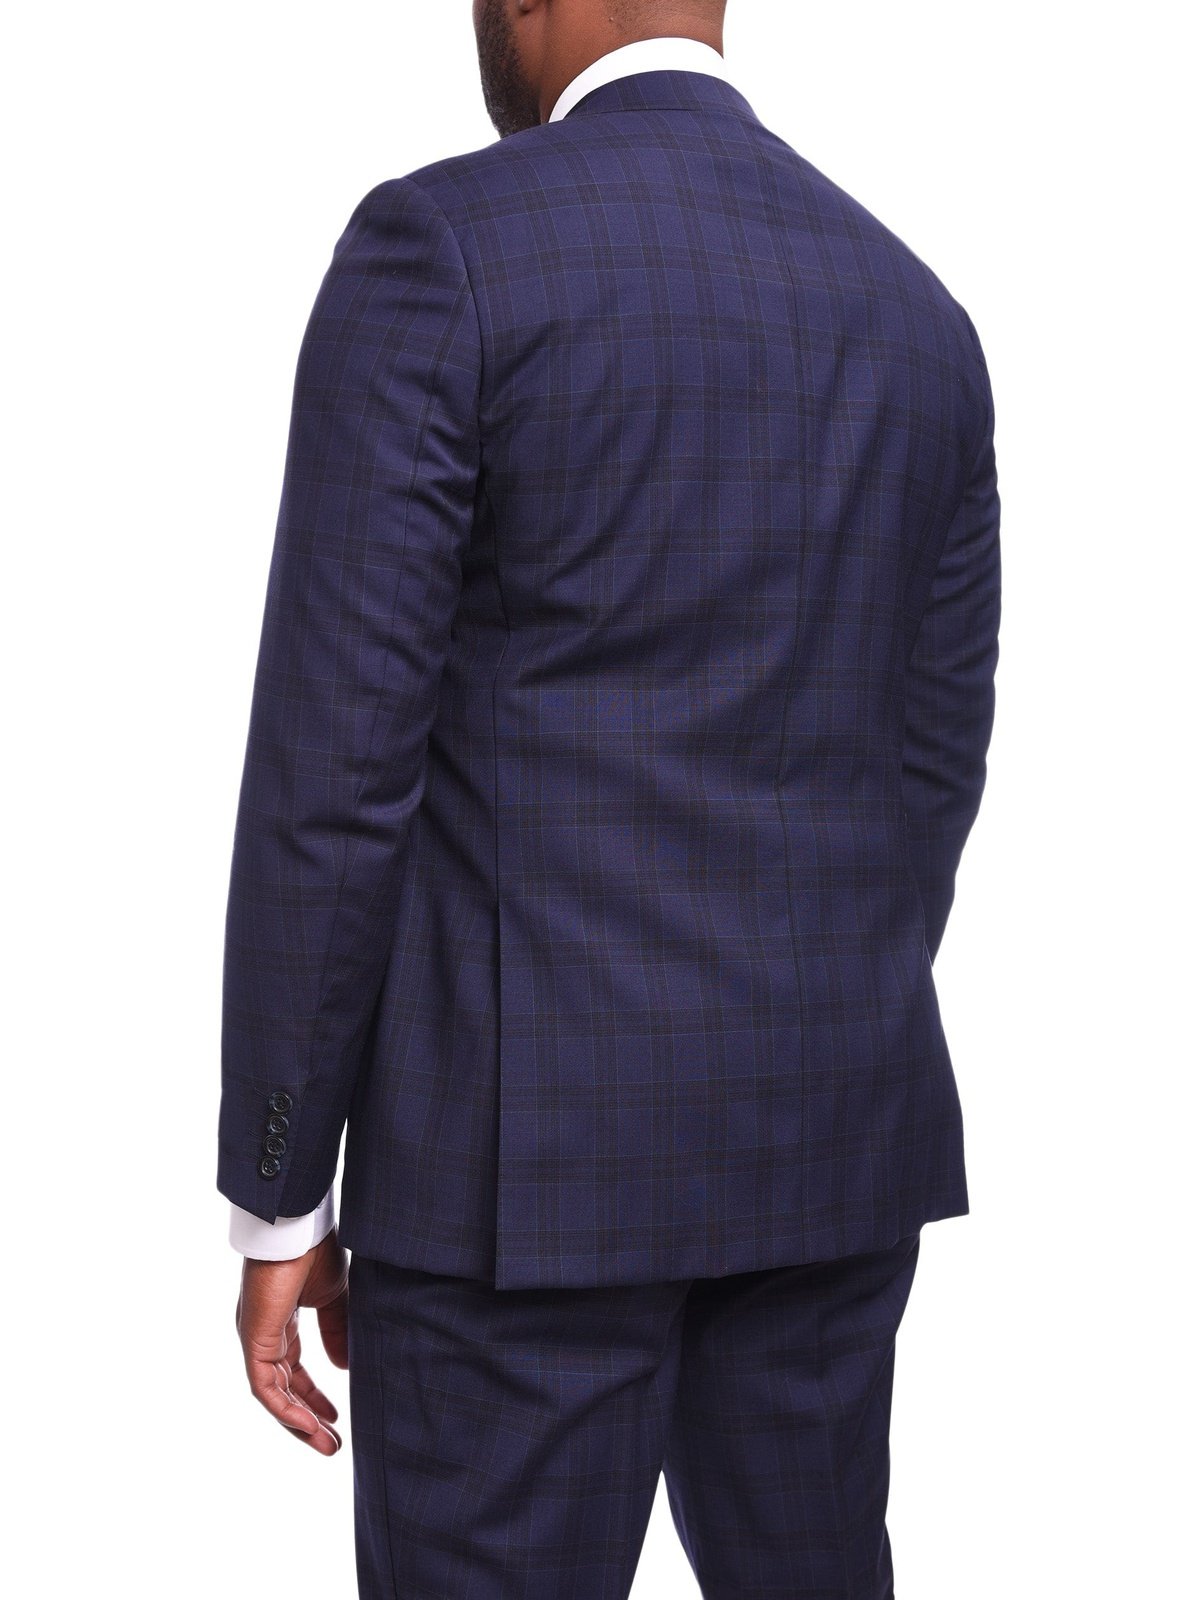 Napoli TWO PIECE SUITS Napoli Slim Fit Navy Blue Plaid Half Canvassed Wool Suit With Wide Peak Lapels